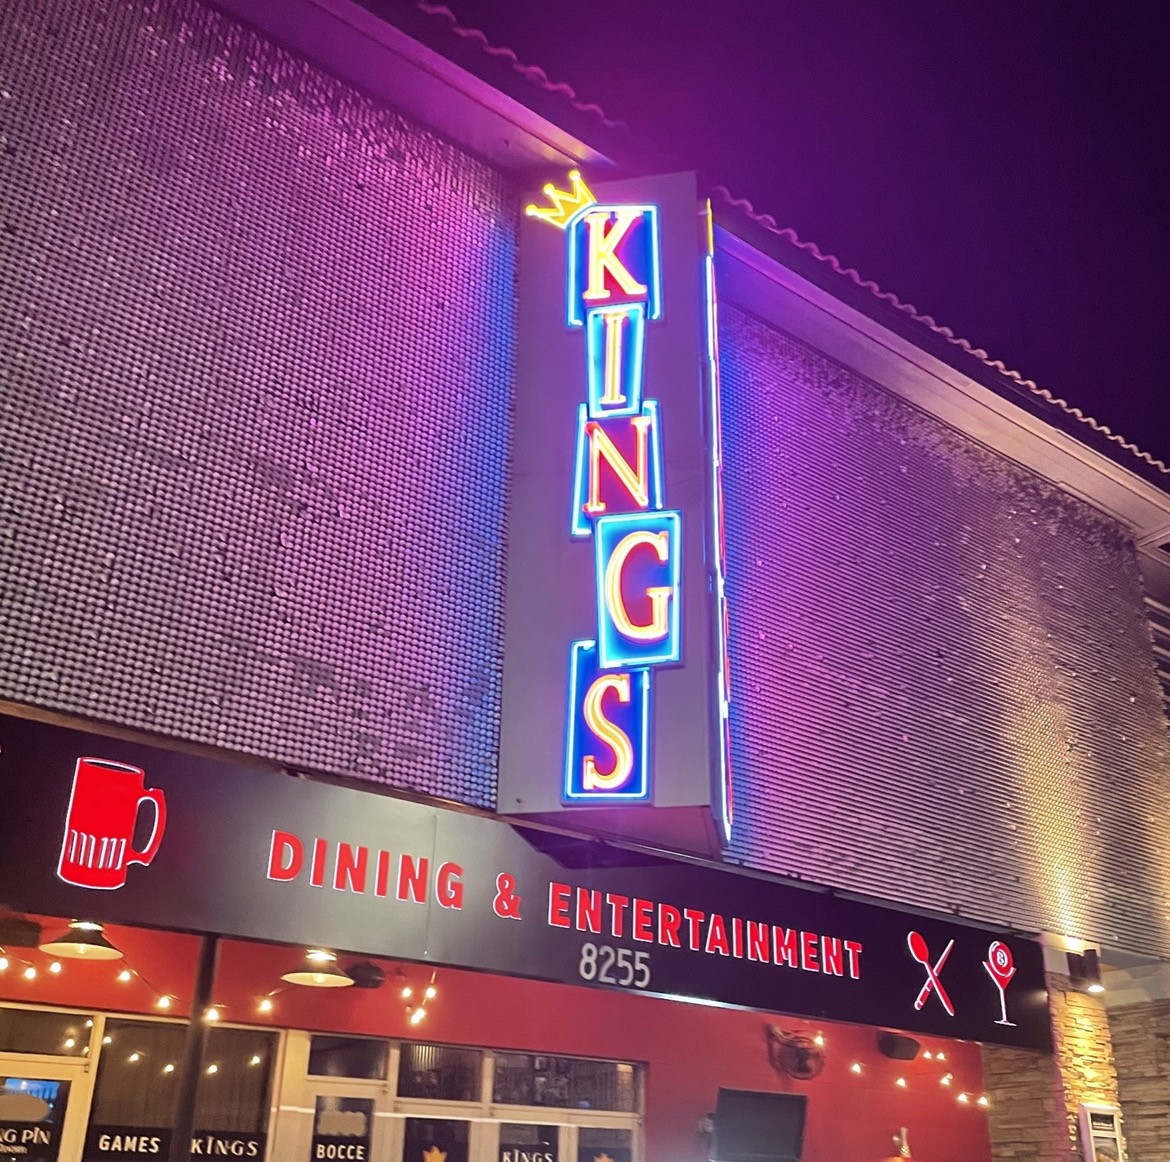 Get some food, drinks and enjoy some entertainment at King's and the other restaurants in and around Icon Park